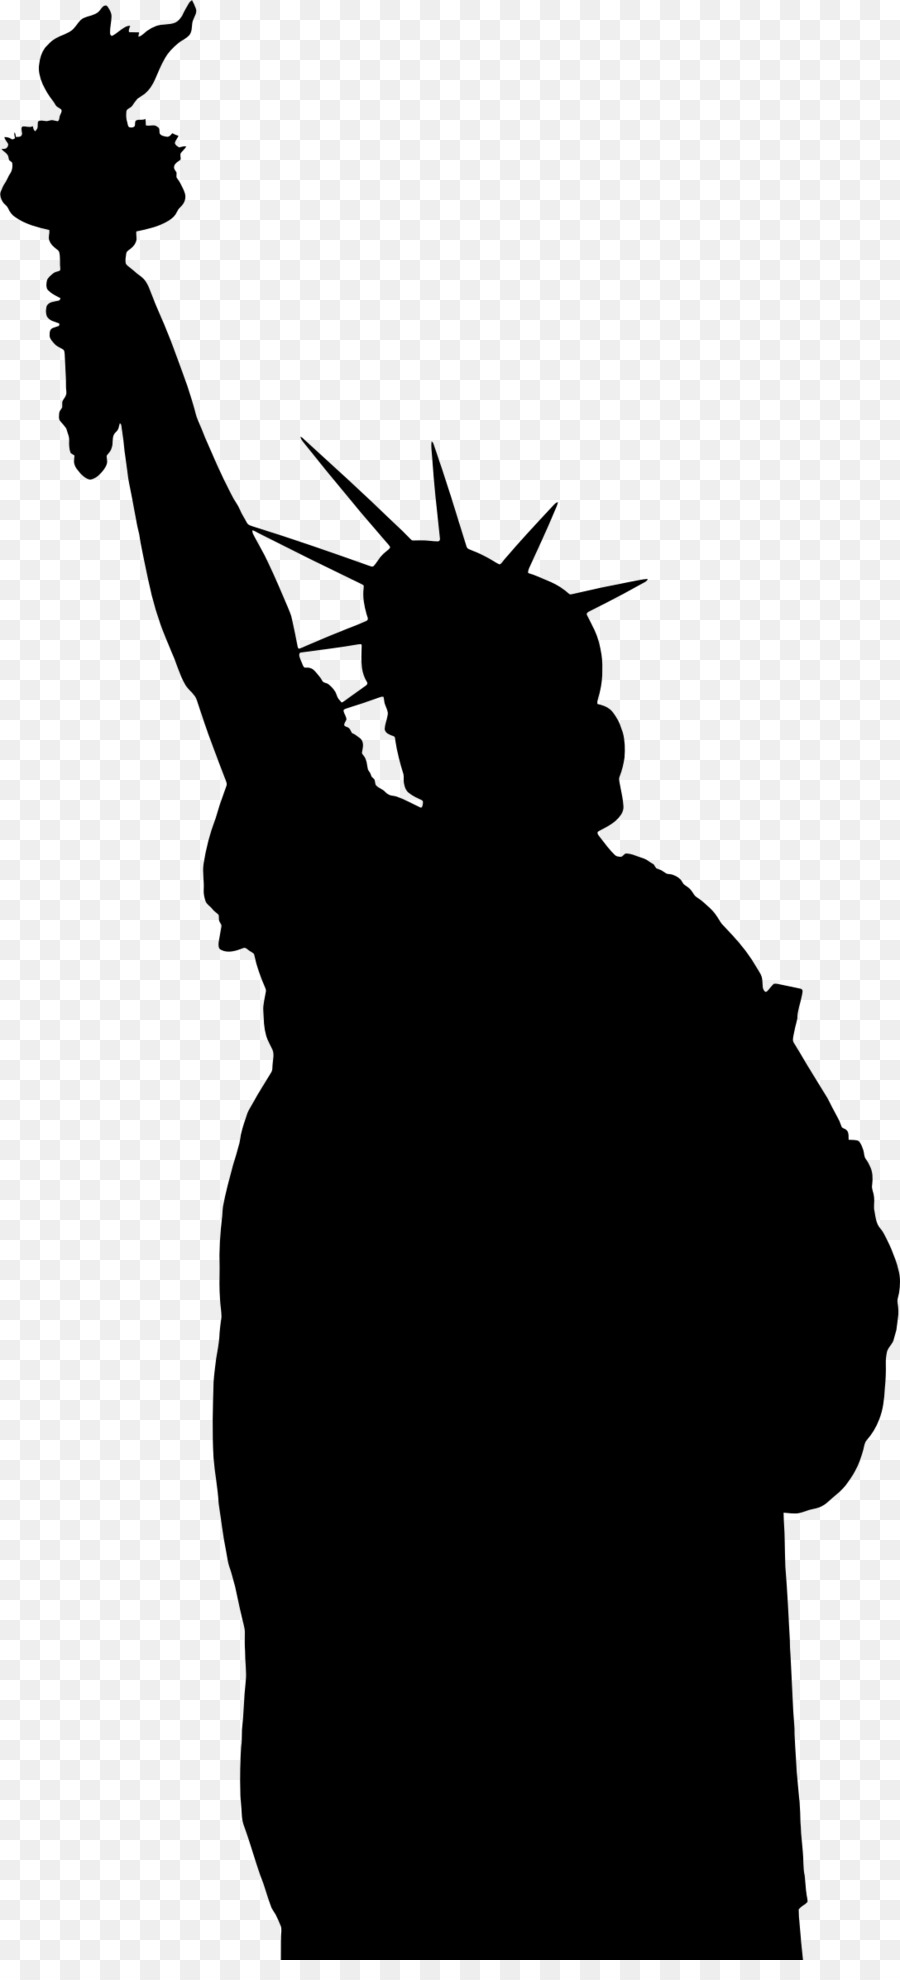 Statue of Liberty Monument Sculpture - usa statue of liberty png download - 1088*2370 - Free Transparent Statue Of Liberty png Download.